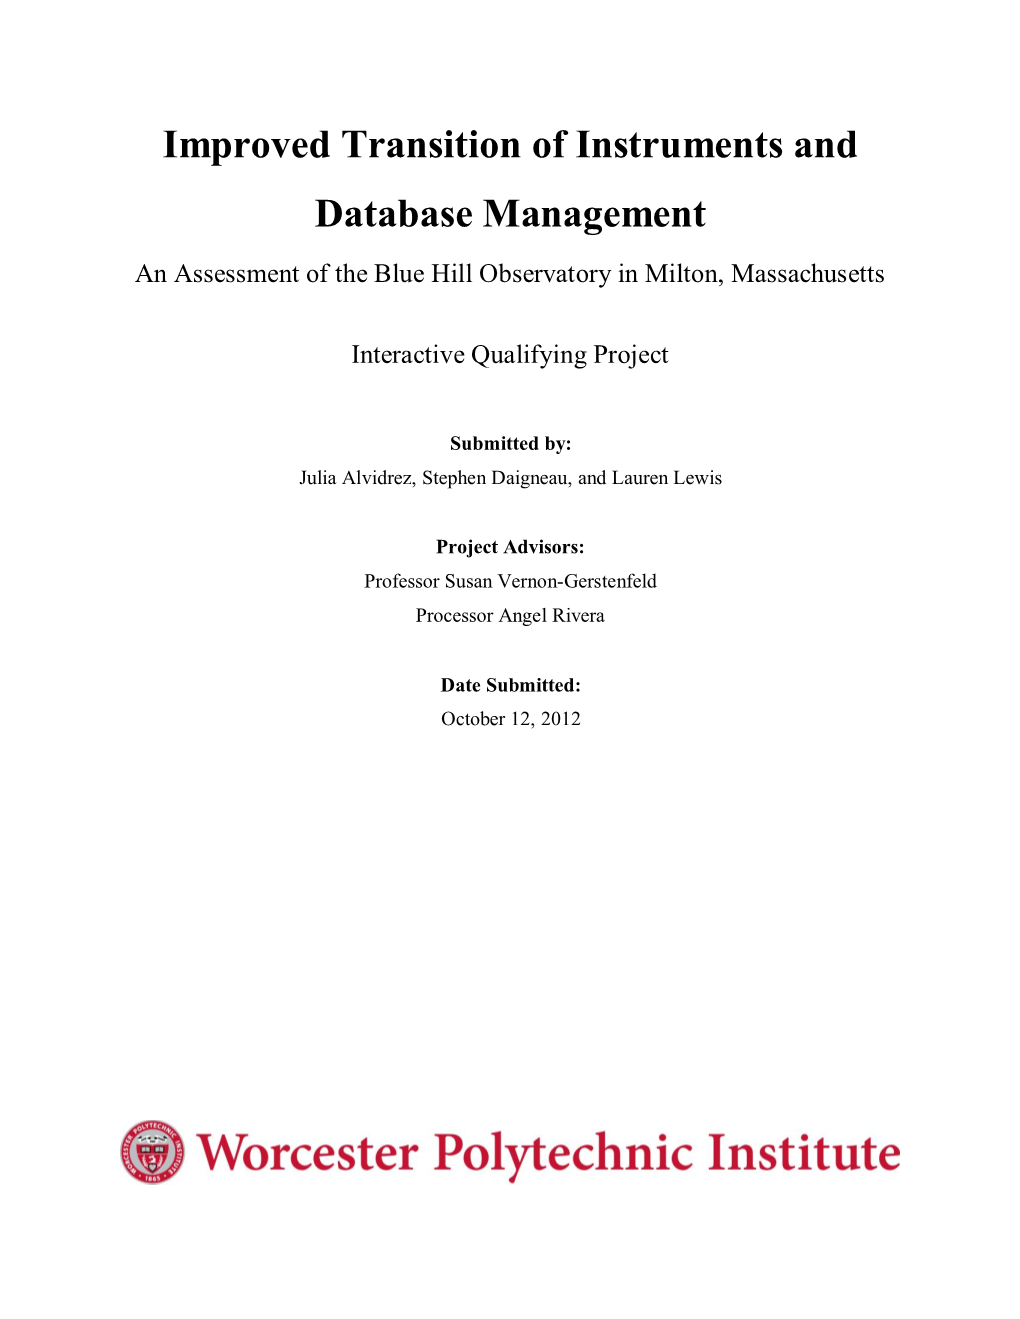 Improved Transition of Instruments and Database Management an Assessment of the Blue Hill Observatory in Milton, Massachusetts